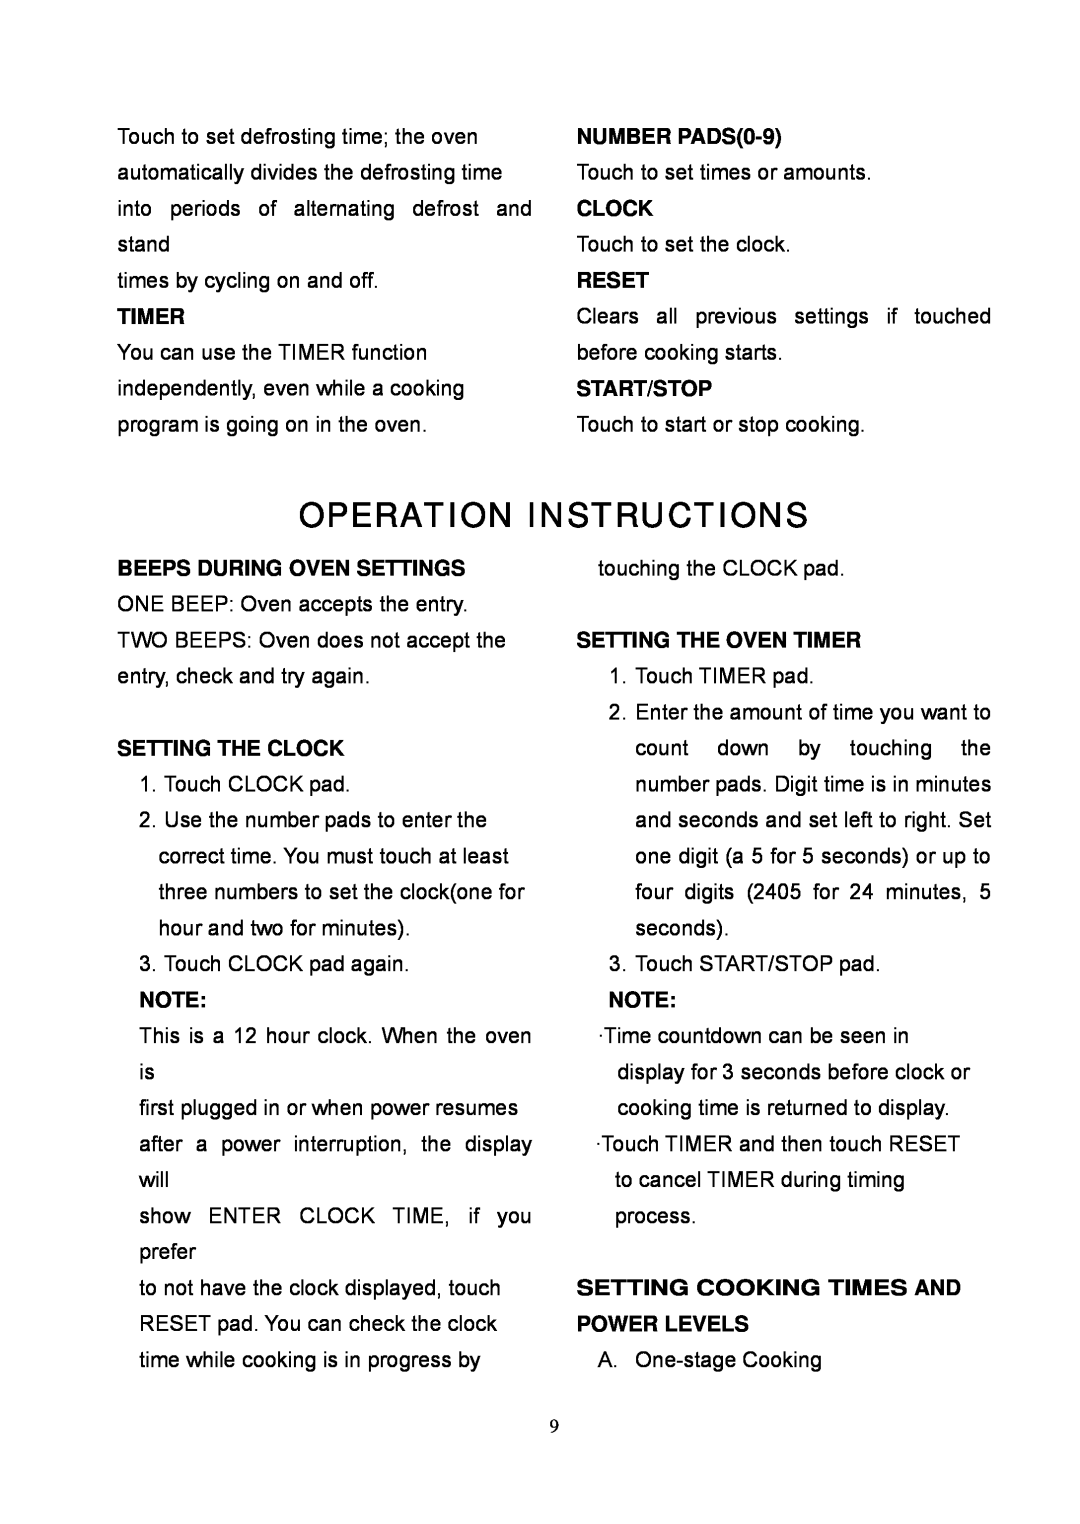 Tappan TM7050S Operation Instructions, Timer, NUMBER PADS0-9, Clock, Reset, Start/Stop, Beeps During Oven Settings 